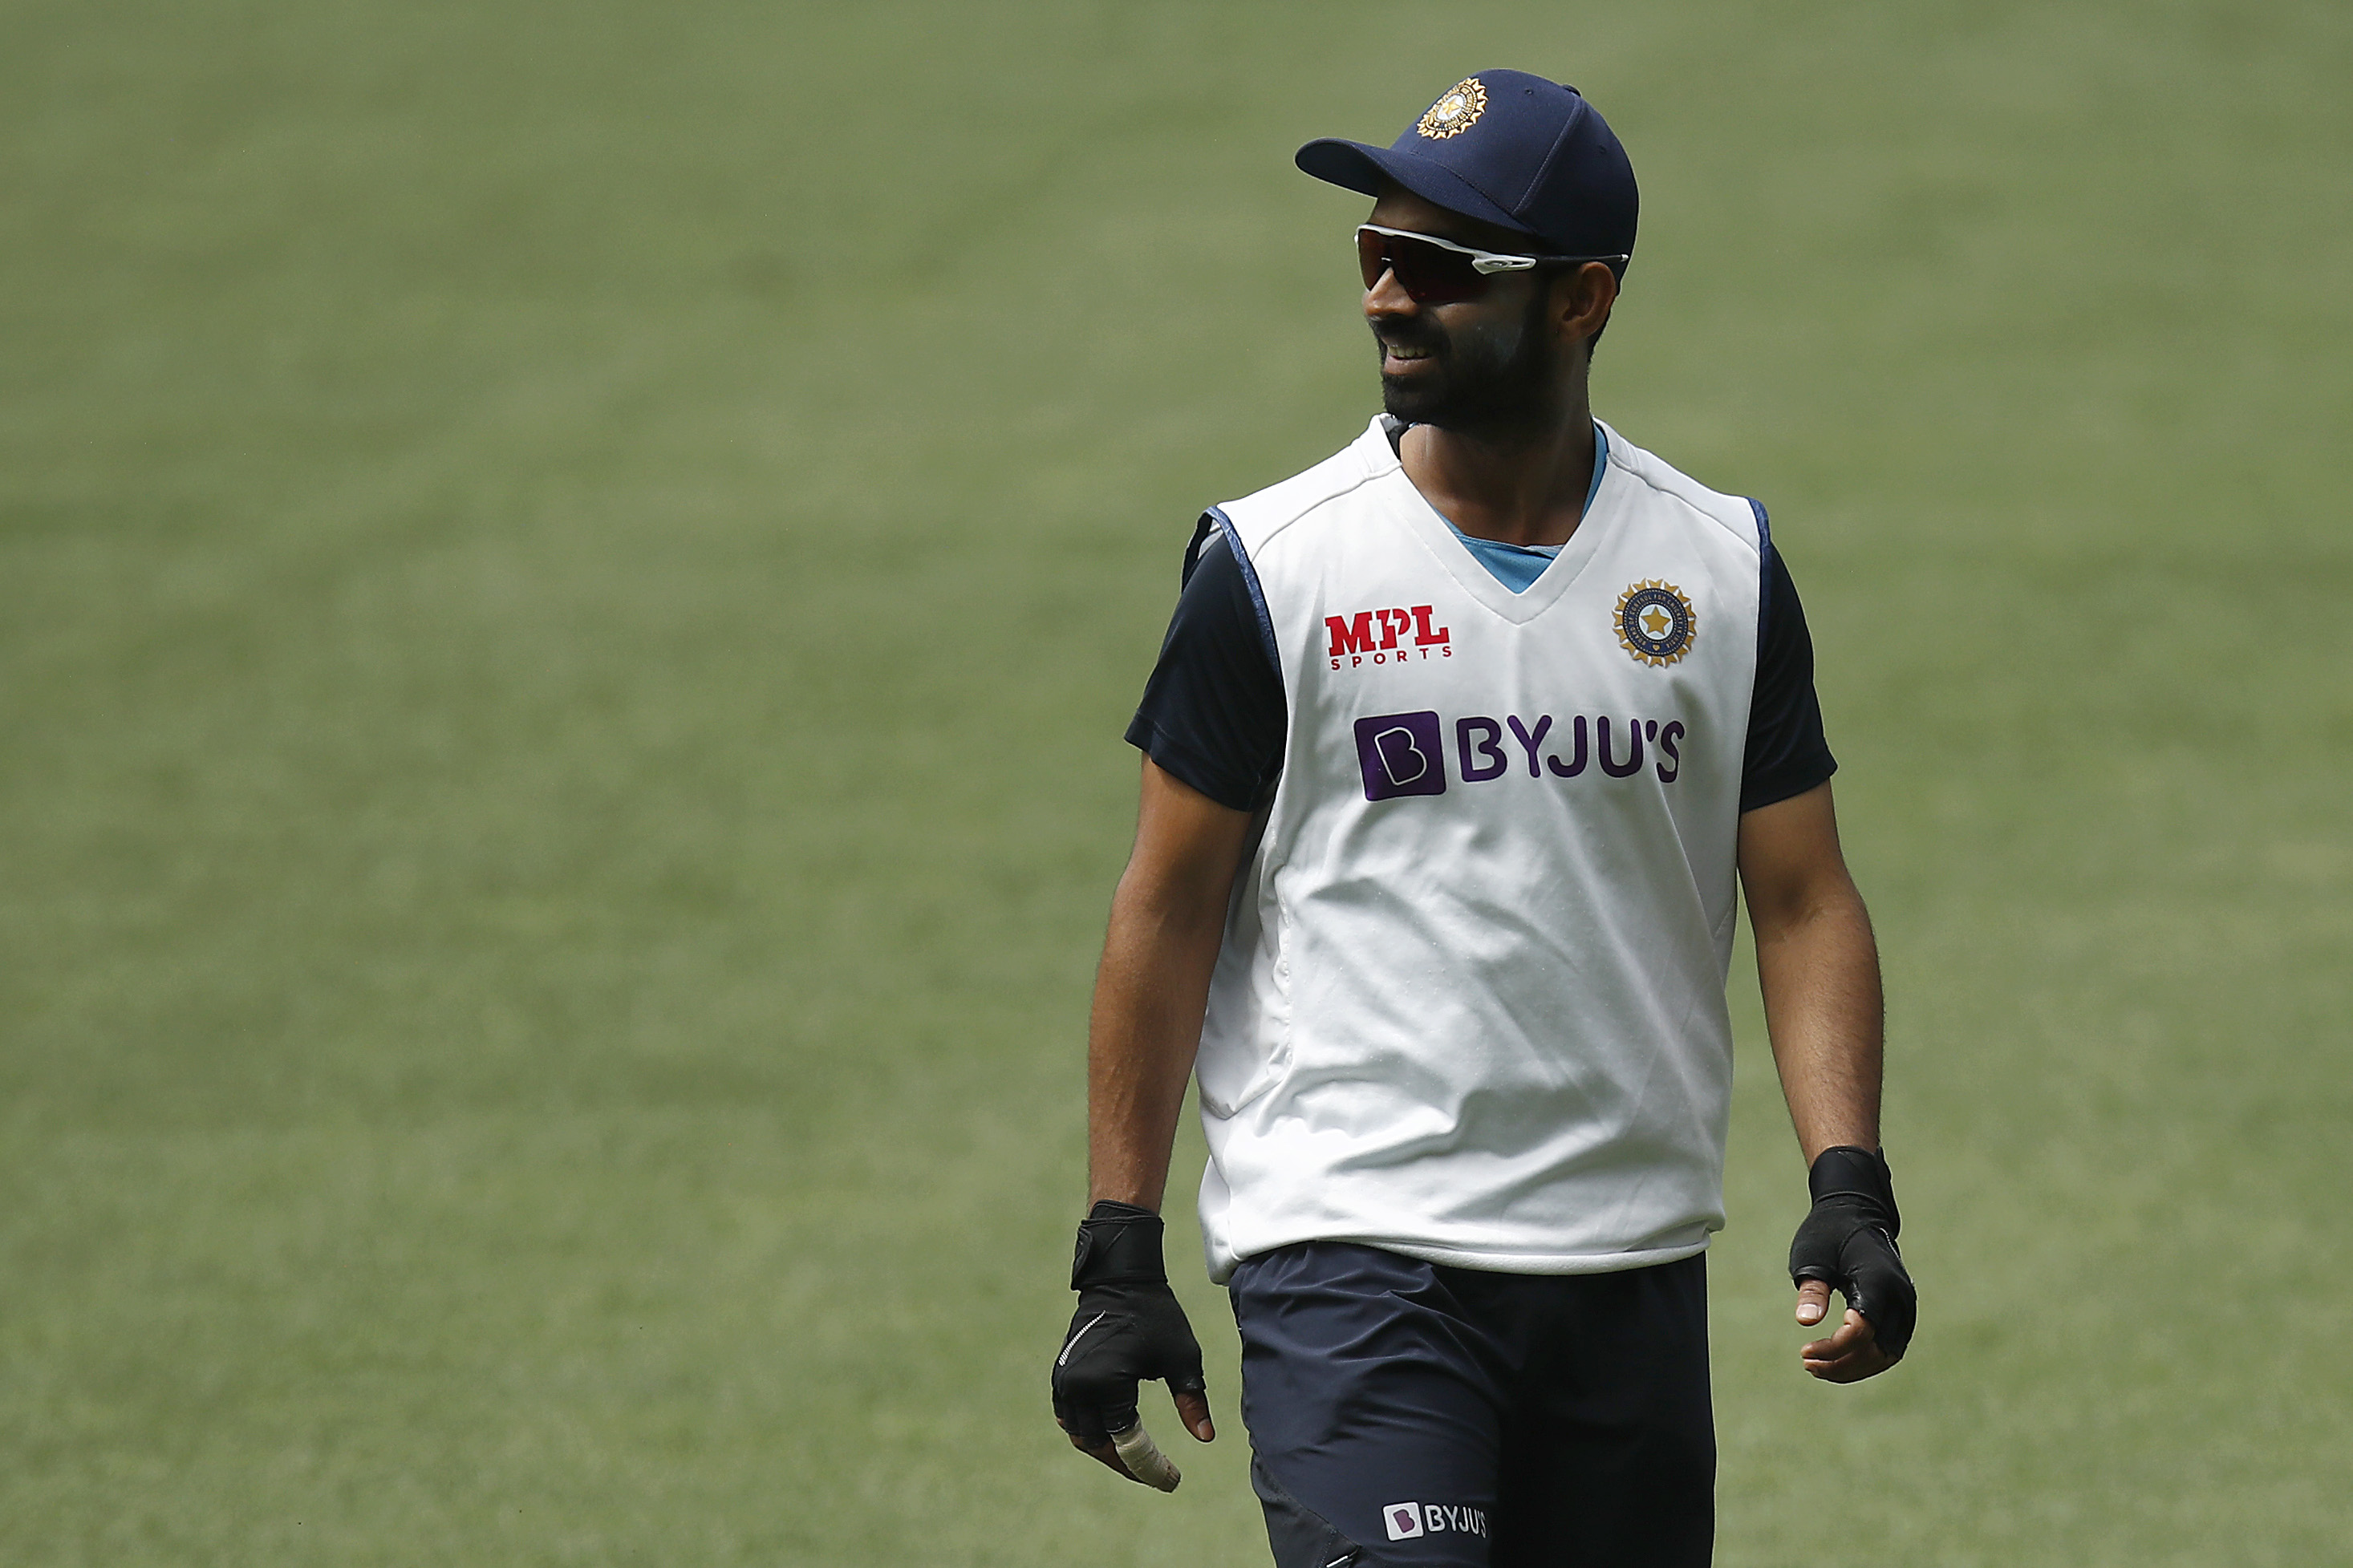 IND vs AUS | The Rishabh Pant 'tactical' move by Rahane at SCG was 'outstanding', opines Brad Haddin